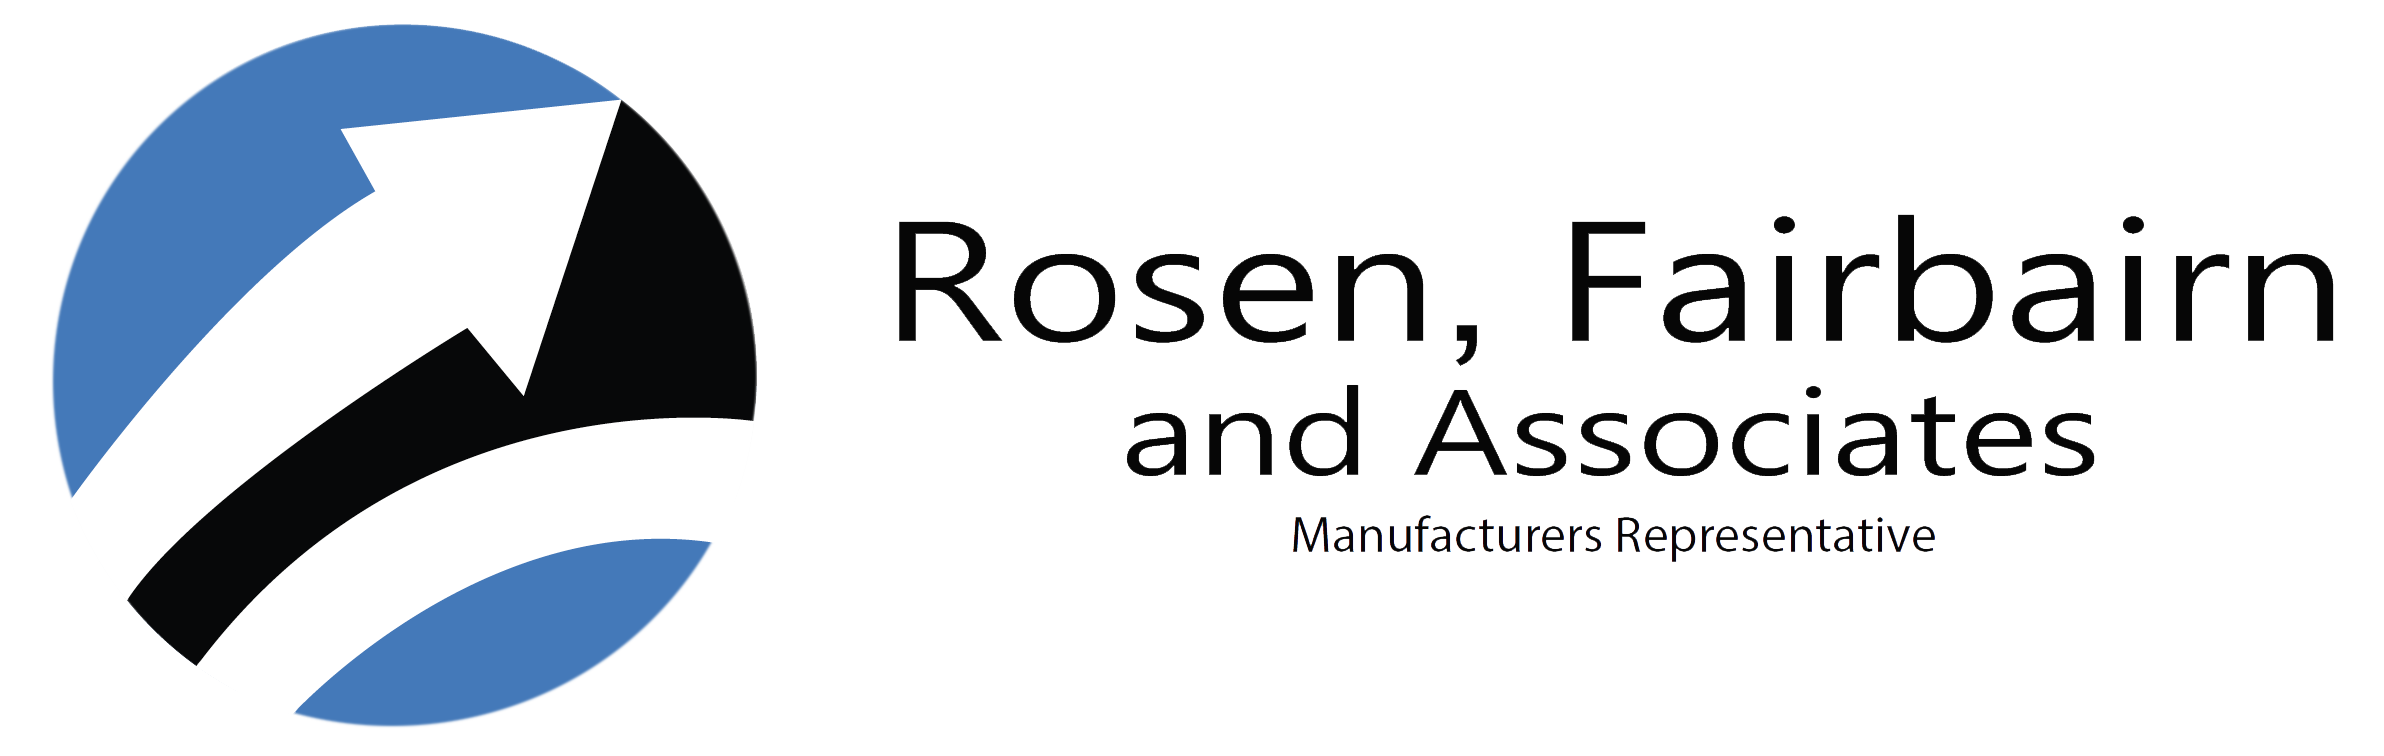 About Rosen, Fairbairn, and Associates Placeholder Image